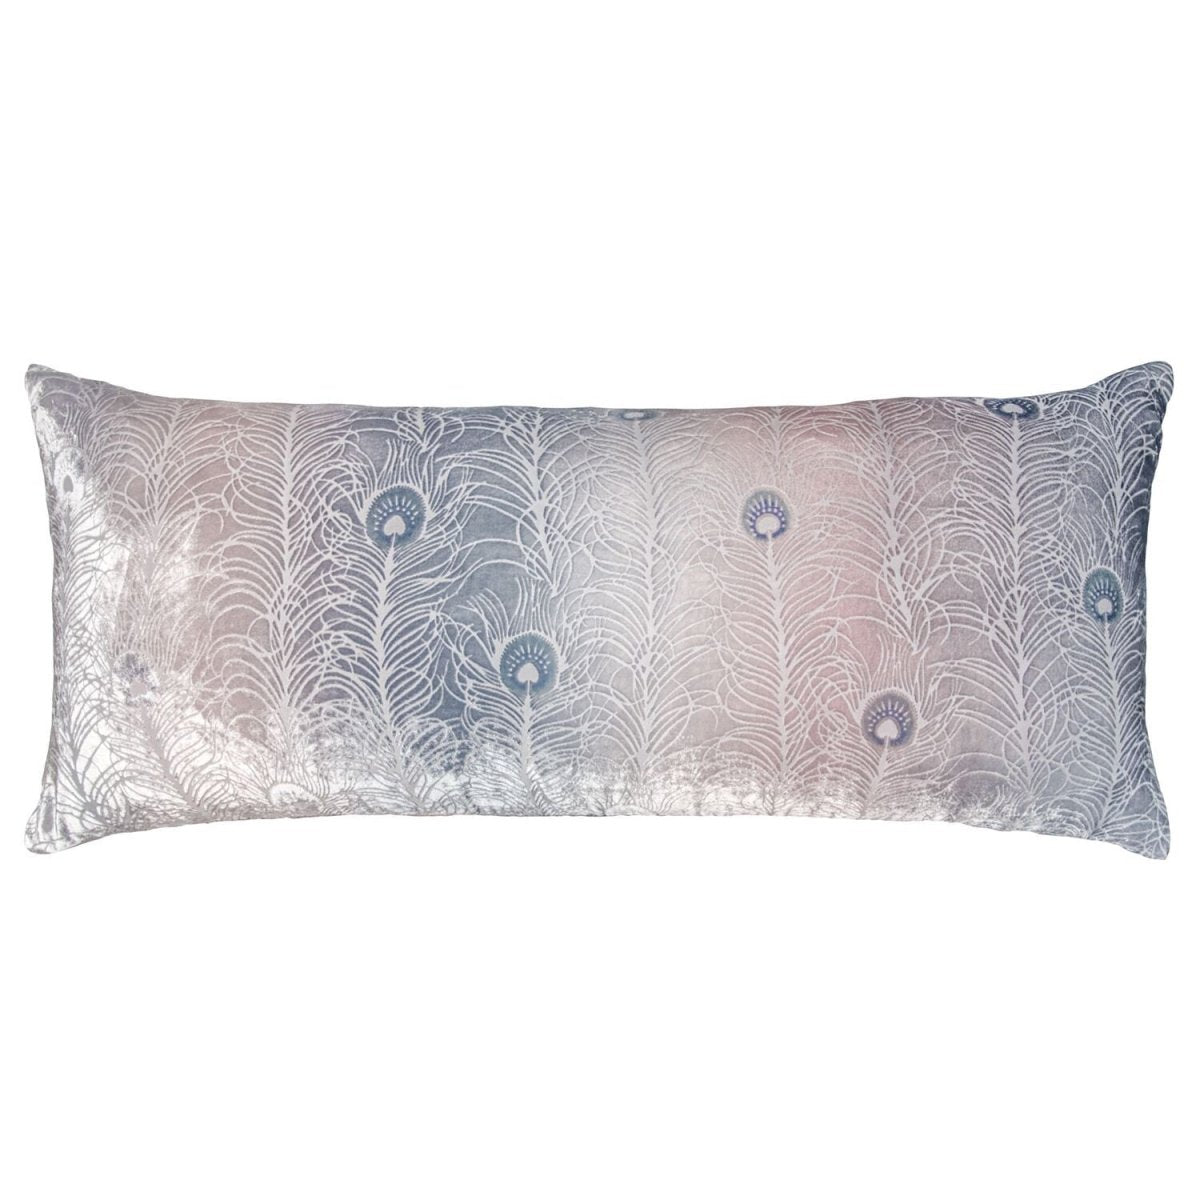 Prism collection - Moonstone Peacock Feather Decorative Pillow by Kevin O'Brien Studio  - Fig Linens